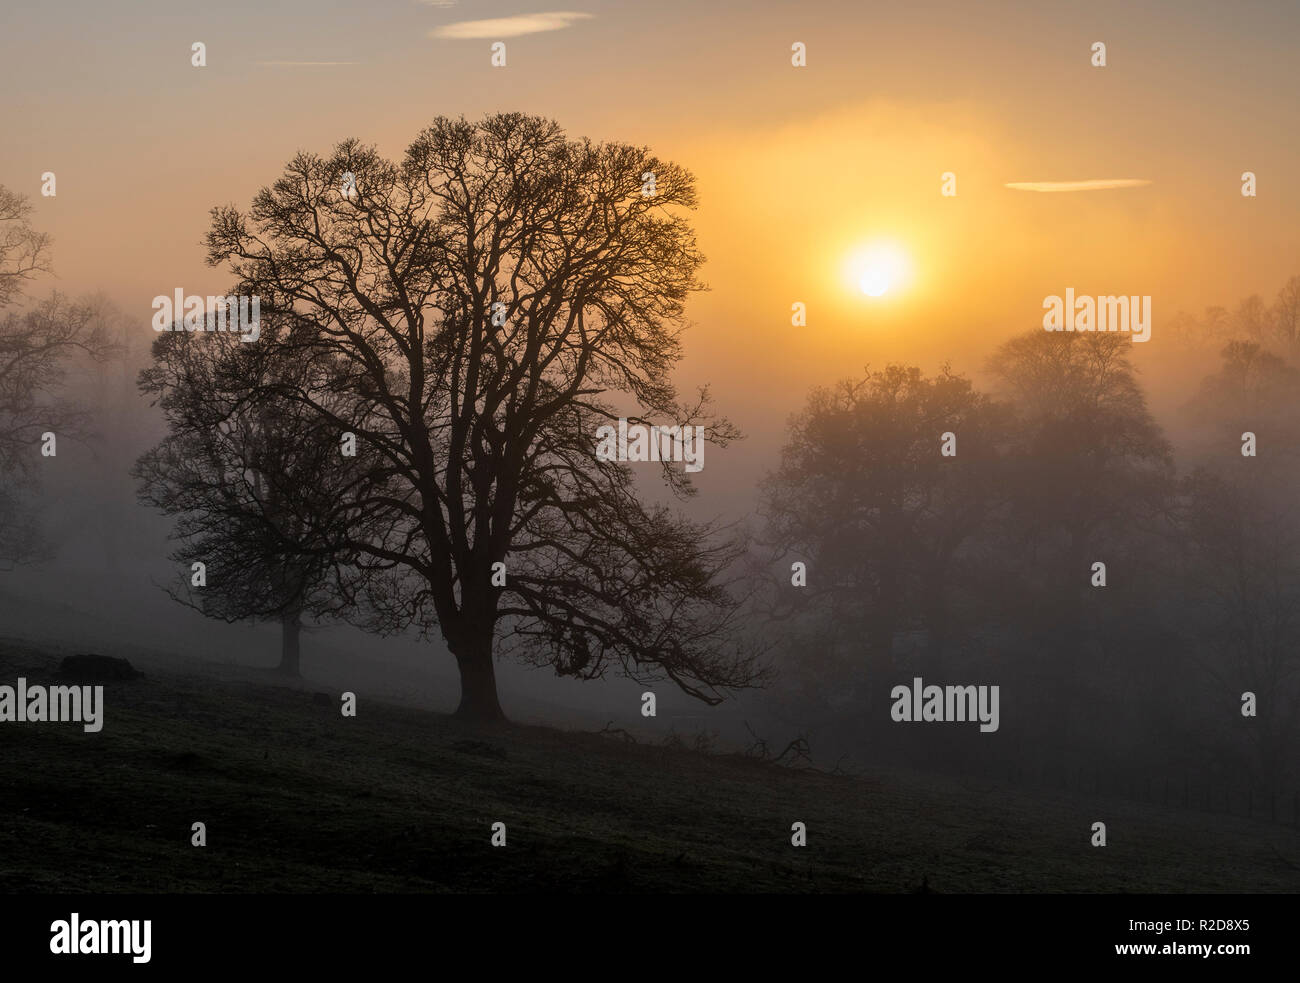 Jedburgh, UK. 18th Nov, 2018. Sunday 18th November 2018. Ancrum, near Jedburgh, Scottish Borders, Scotland, UK. SCOTLAMD UK WEATHER NEWS As the recent spell of warm weather is expected to end as cold air pushes in from western Europe, mist gathers on fields and trees near Jedburgh in the Scottish Borders as the sun sets on a glorious autumn day across the UK. Photography by Credit: phil wilkinson/Alamy Live News Stock Photo